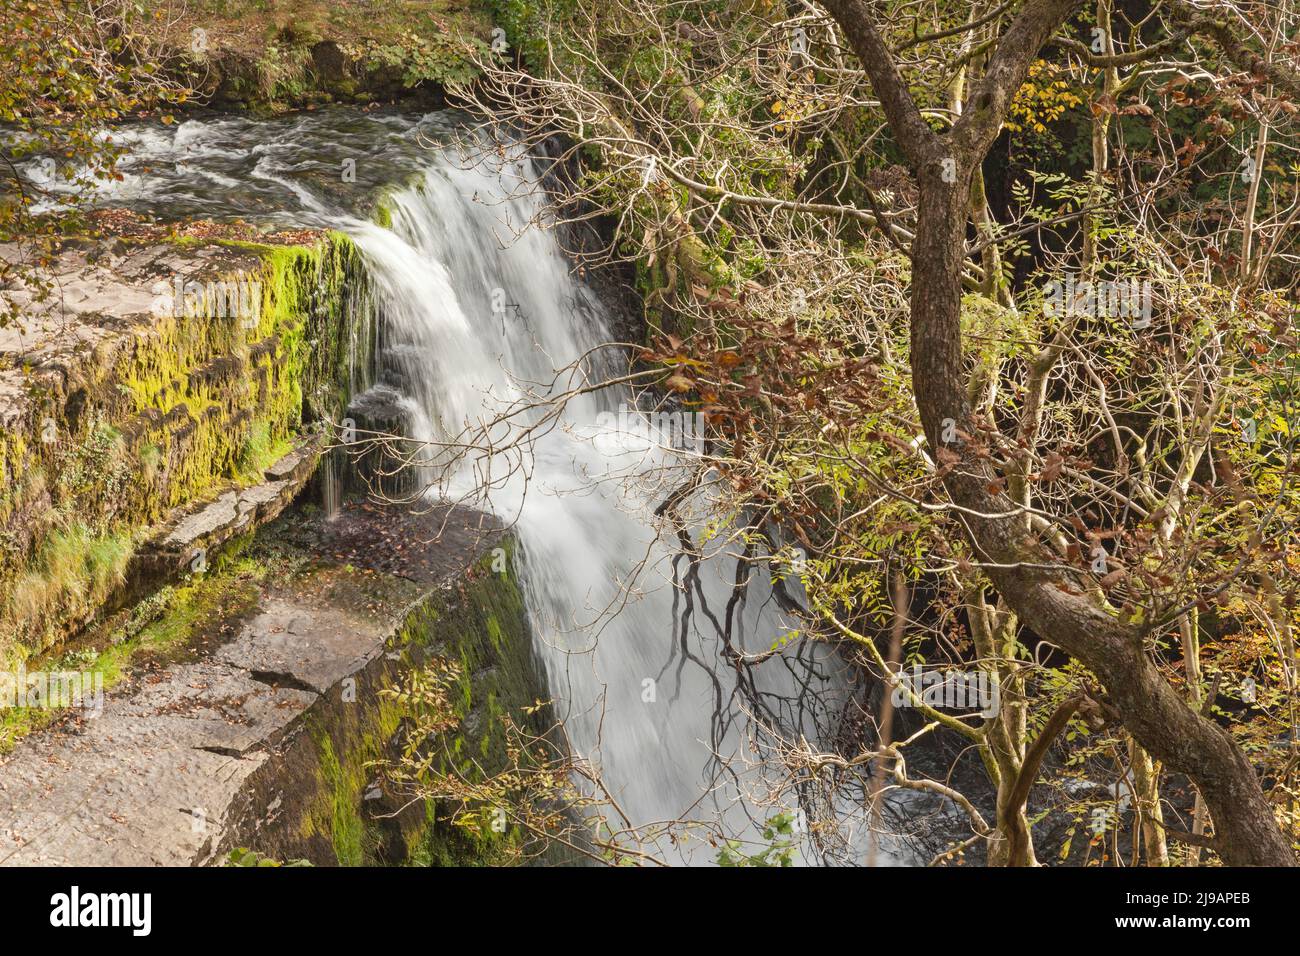 Sgwd Clun-Gwyn (Waterfall of the White Meadow), River Mellte, near Ystradfellte, Brecon Beacons National Park, Powys, South Wales, UK Stock Photo